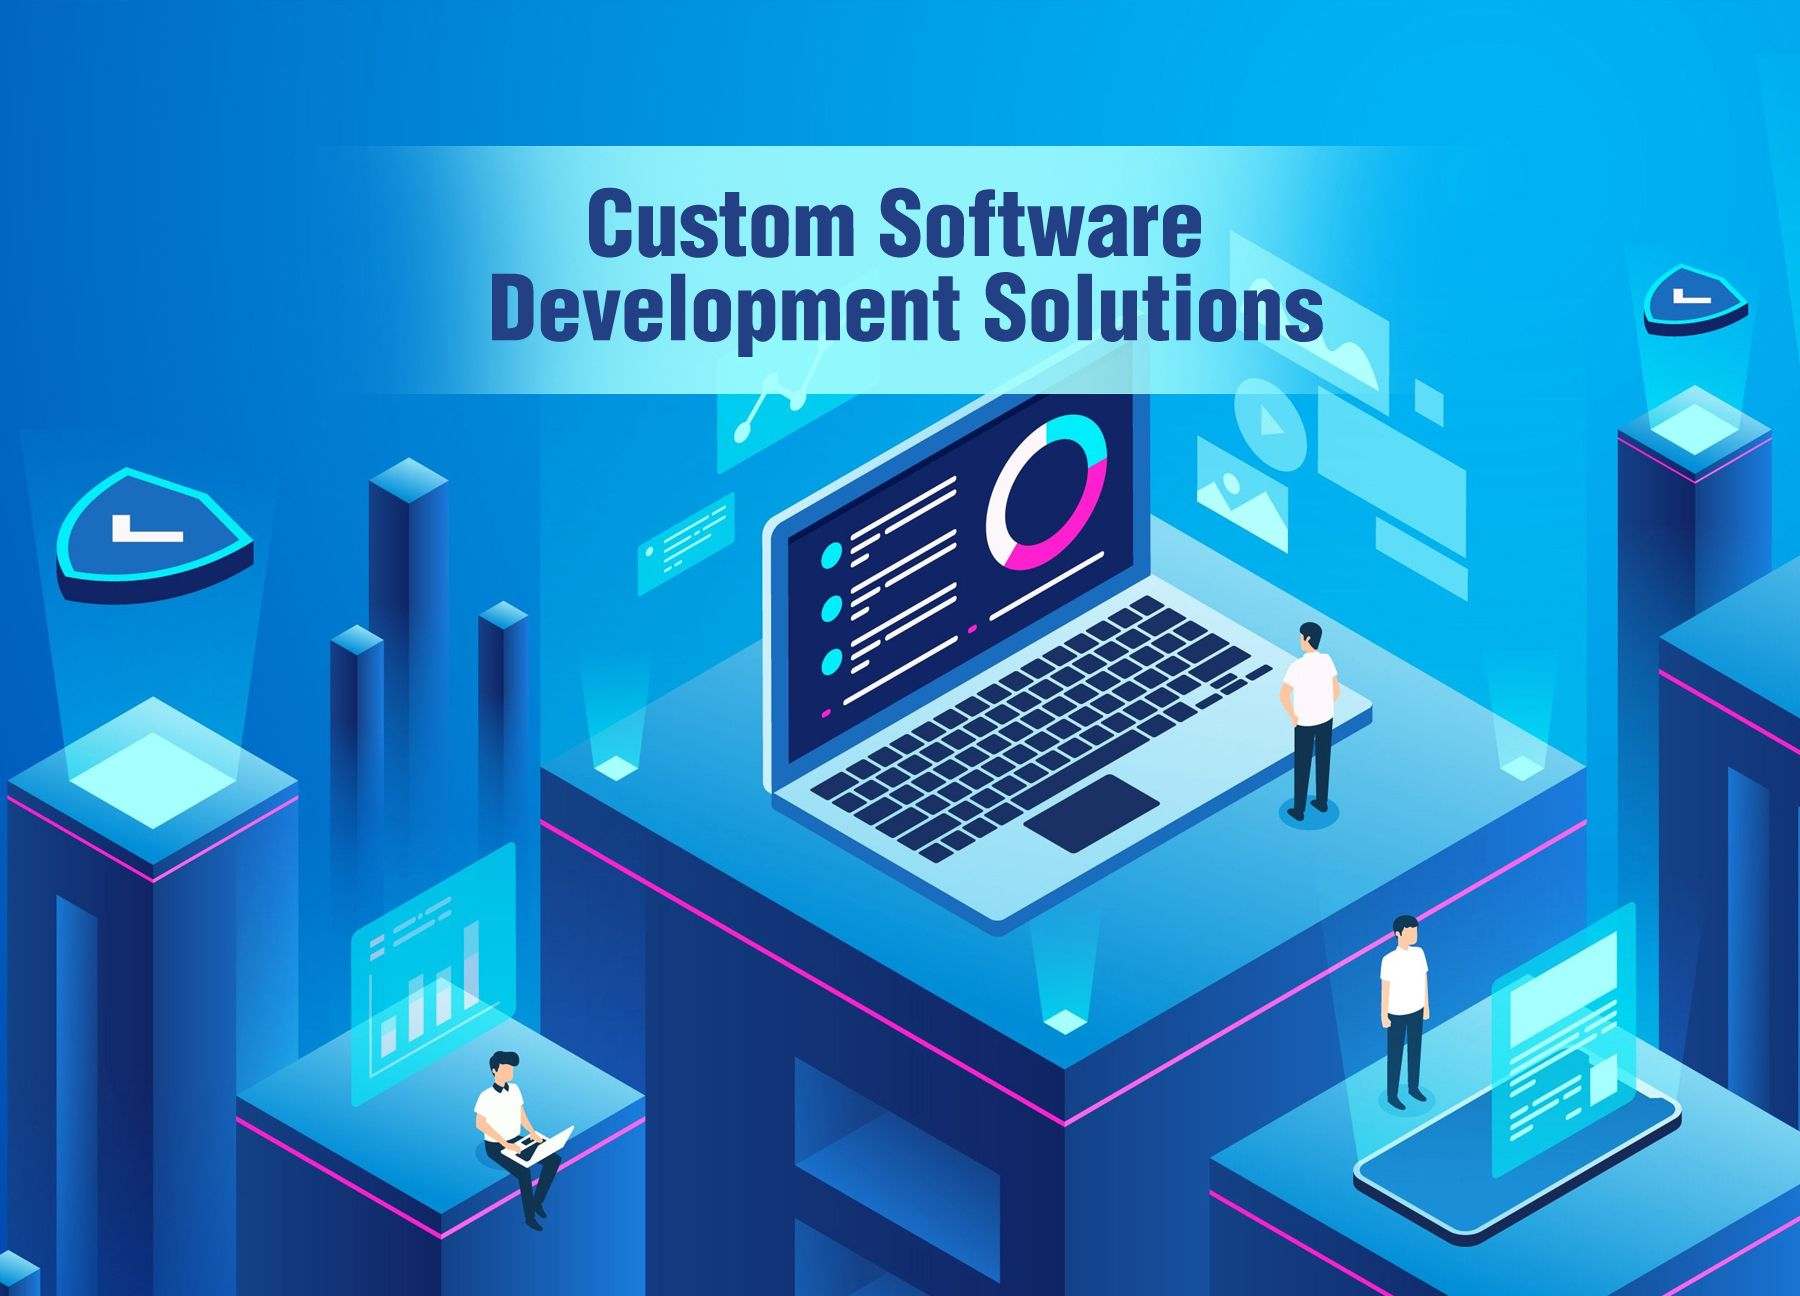 Best Practices for Developing Software Solutions